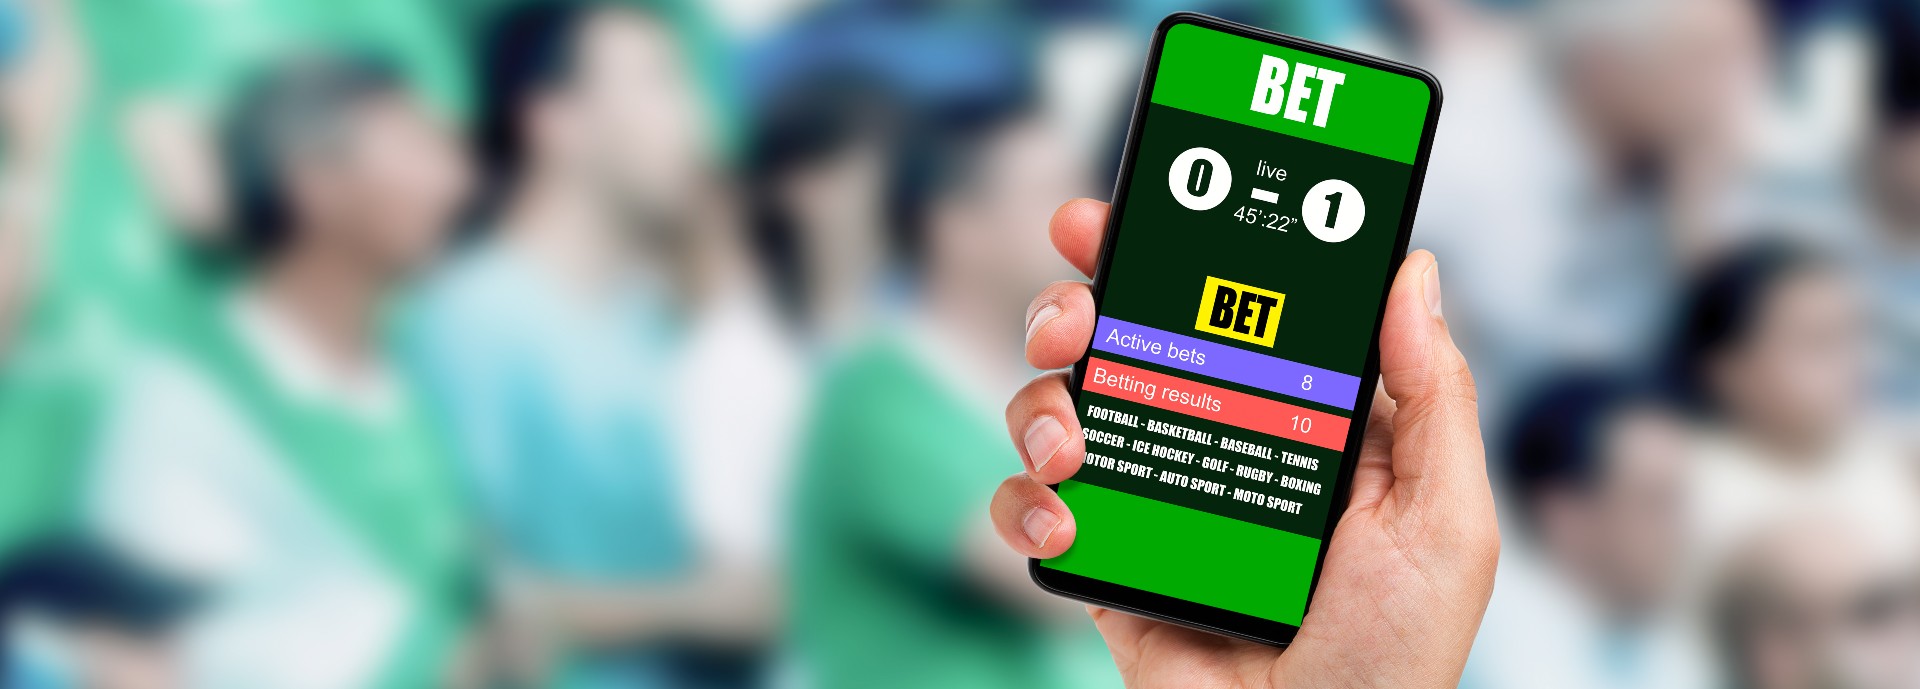 Close-up on man holding a cell phone while winning an online bet on a football game at stadium